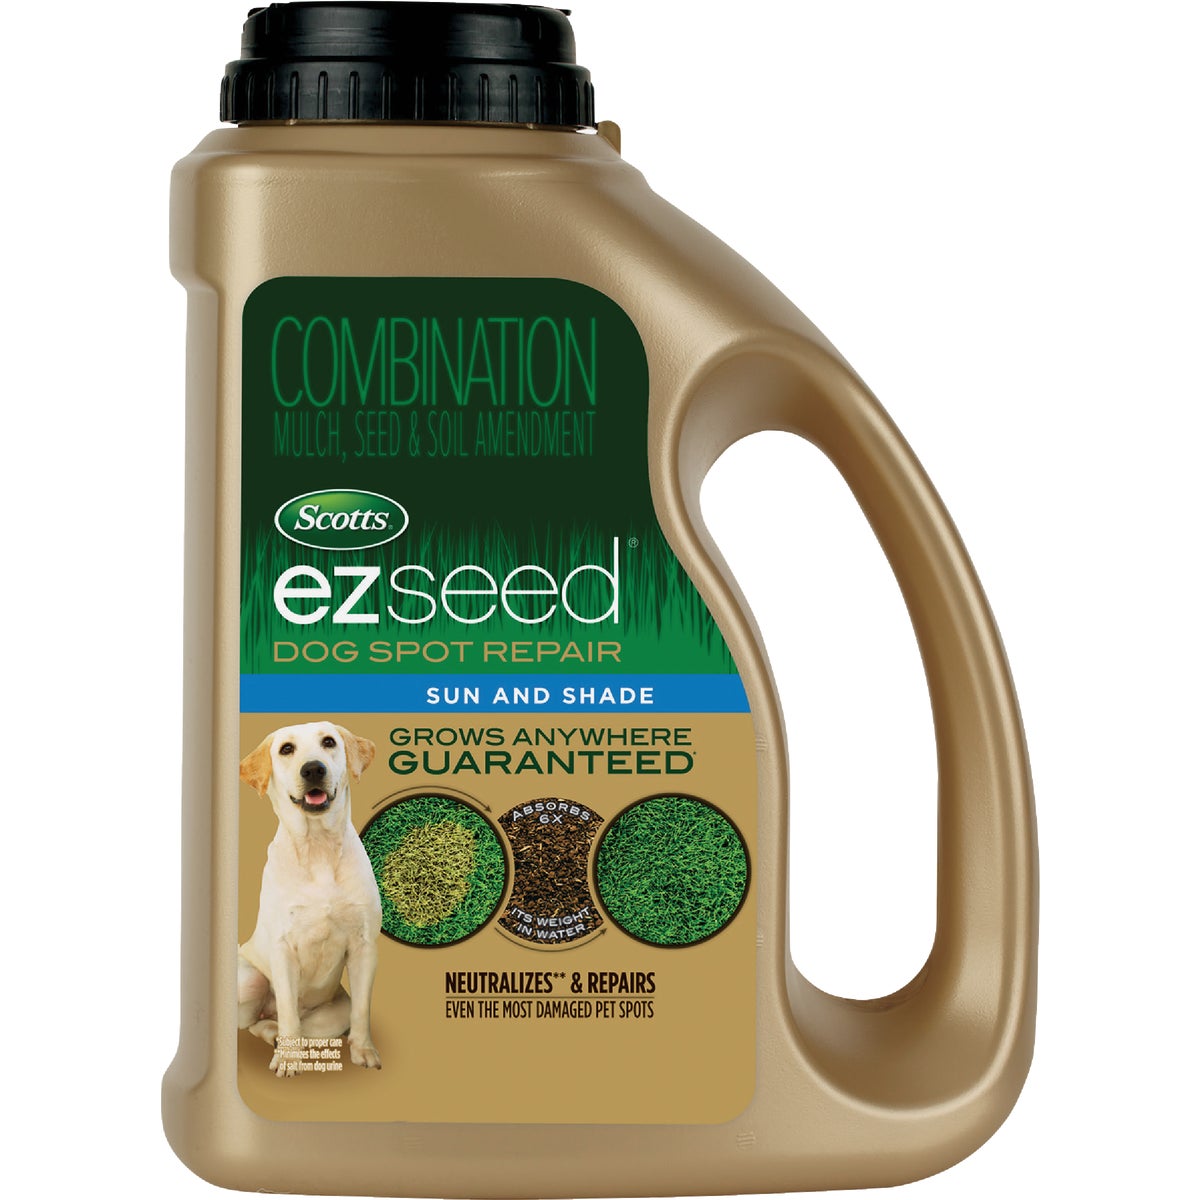 Item 700842, Grass seed that neutralizes and repairs even the most damaged pet spots.